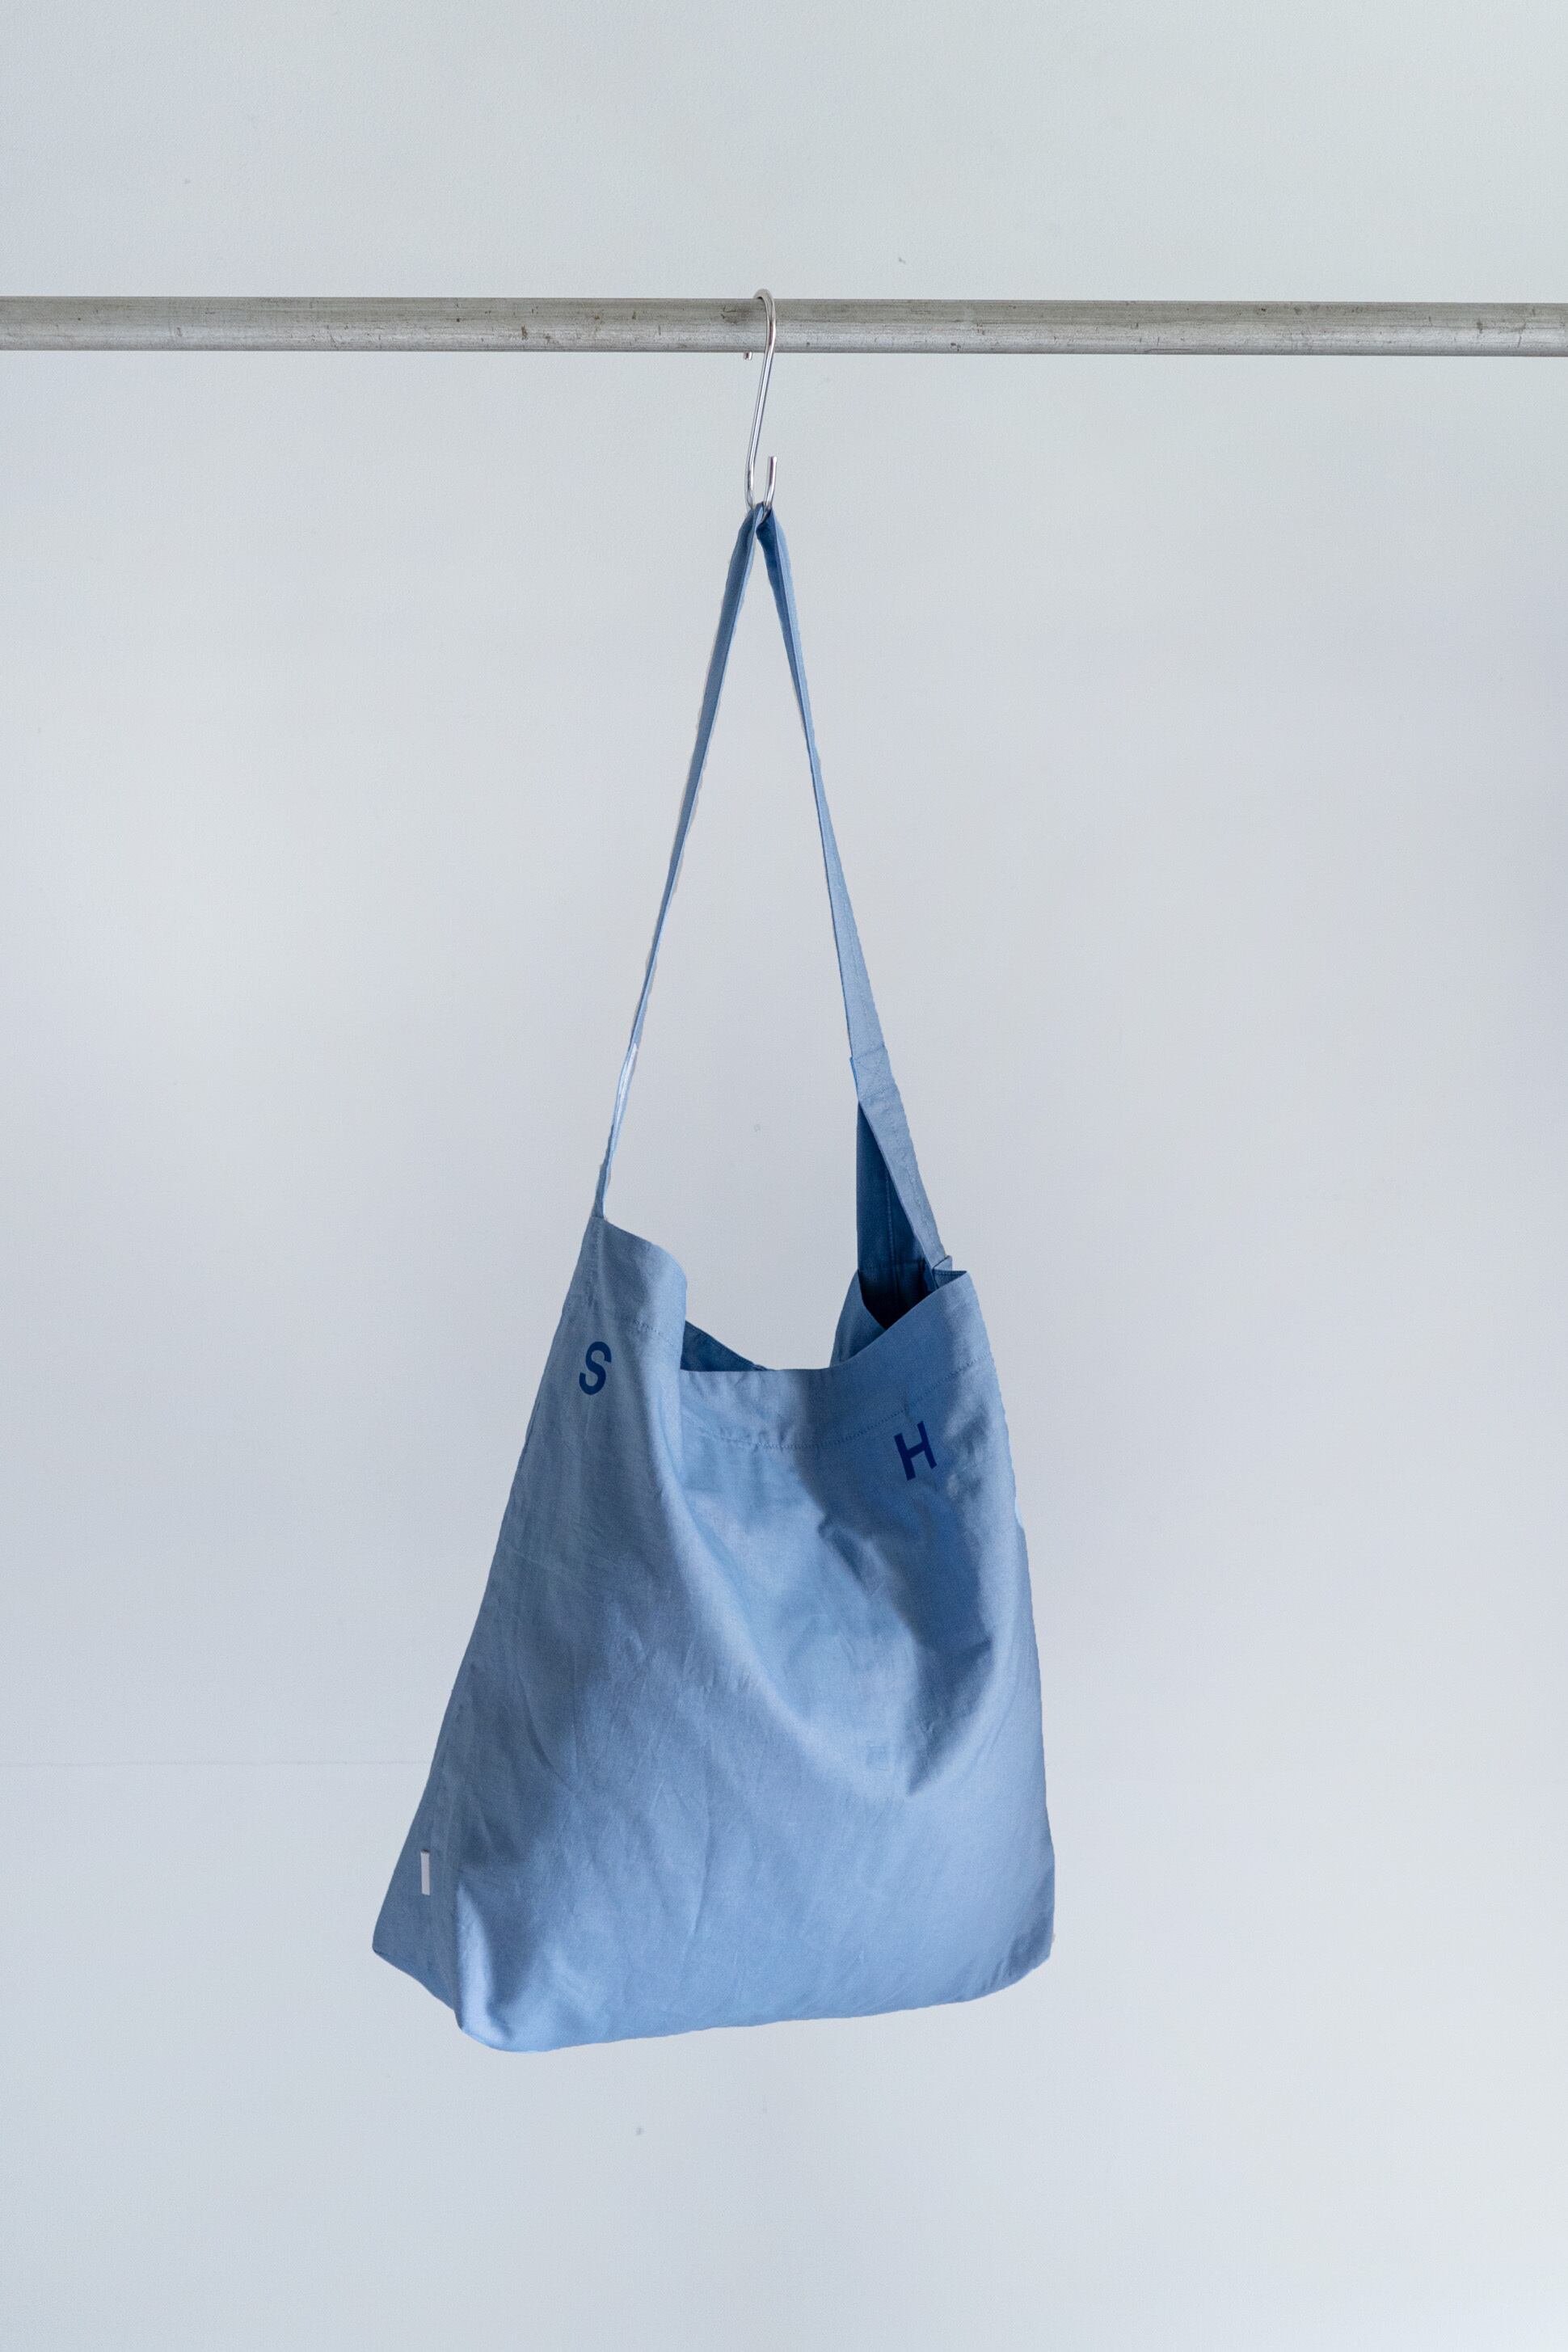 SH / ERA FOR S H EXCLUSIVE BAG CHAMBRAY（S H LOGO)  -BLUE-